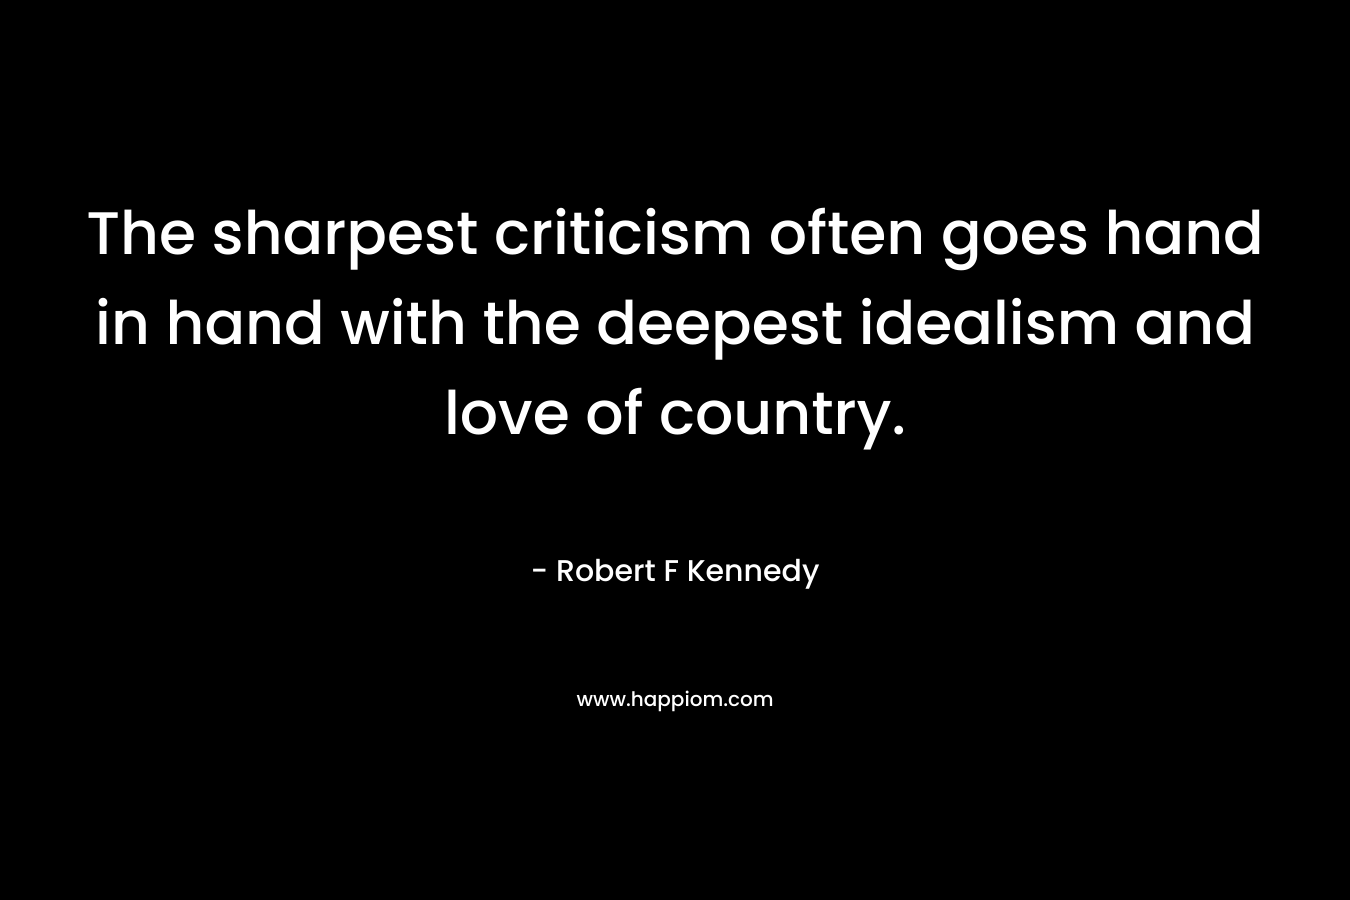 The sharpest criticism often goes hand in hand with the deepest idealism and love of country. – Robert F Kennedy